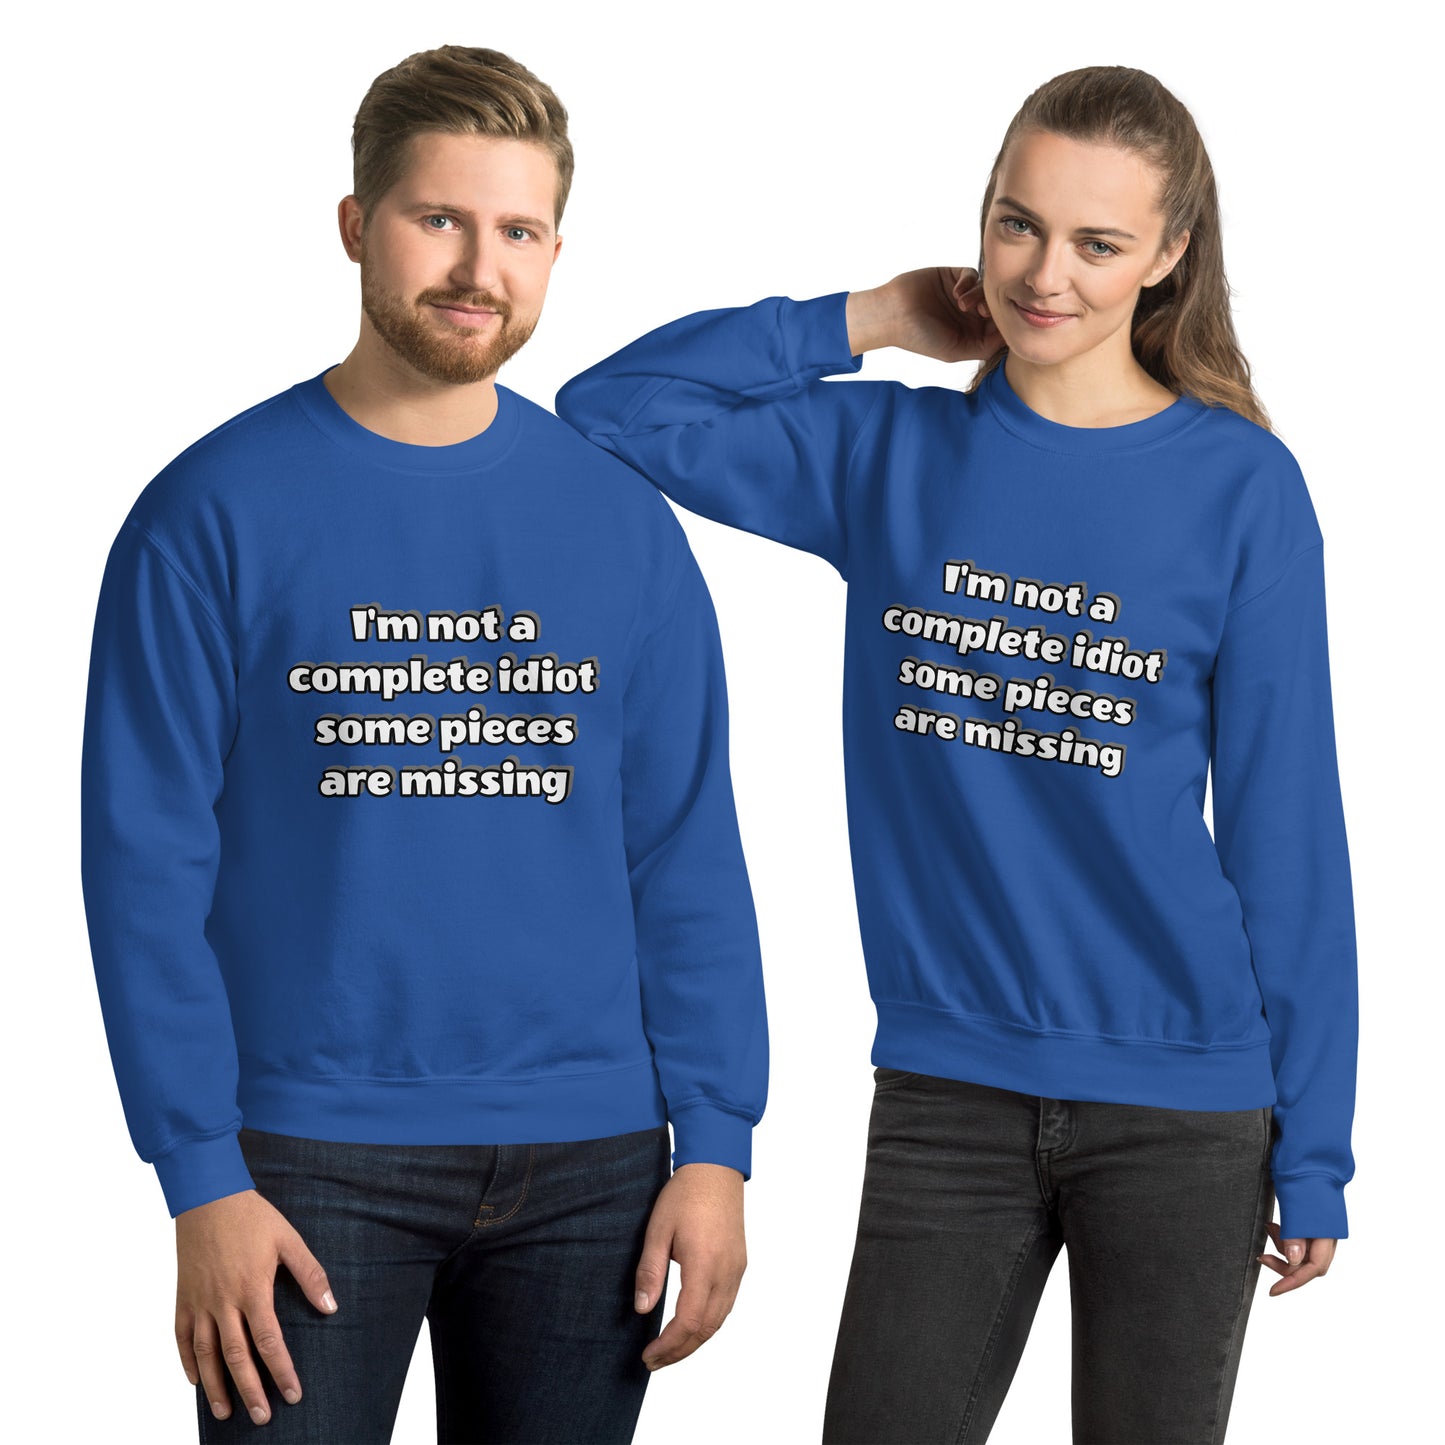 Man and women with royal blue sweatshirt with text “I’m not a complete idiot, some pieces are missing”